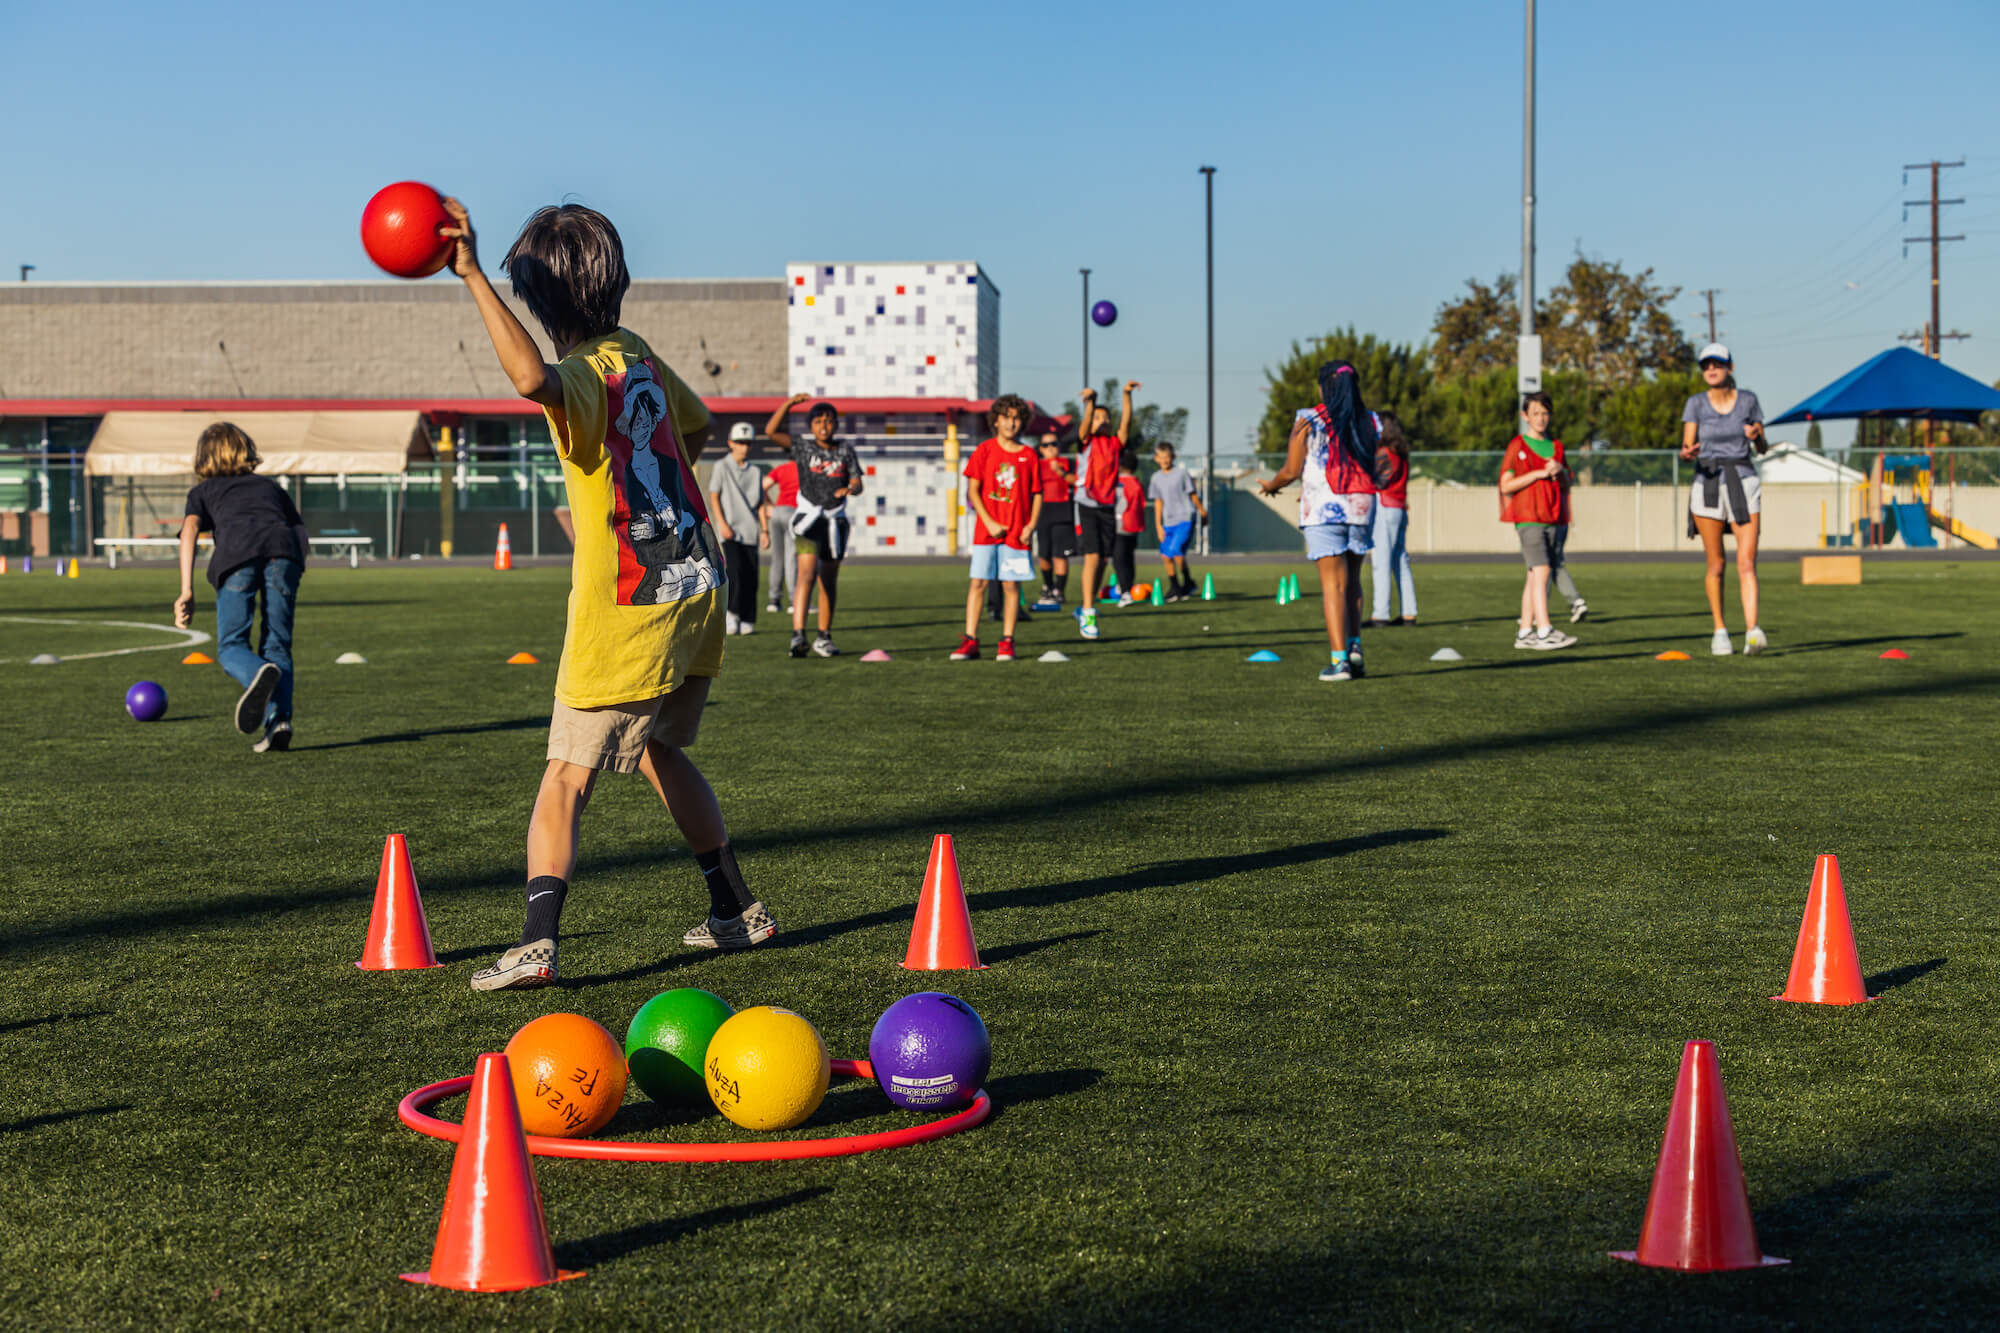 Students play a dodgeball-type game on a school field.